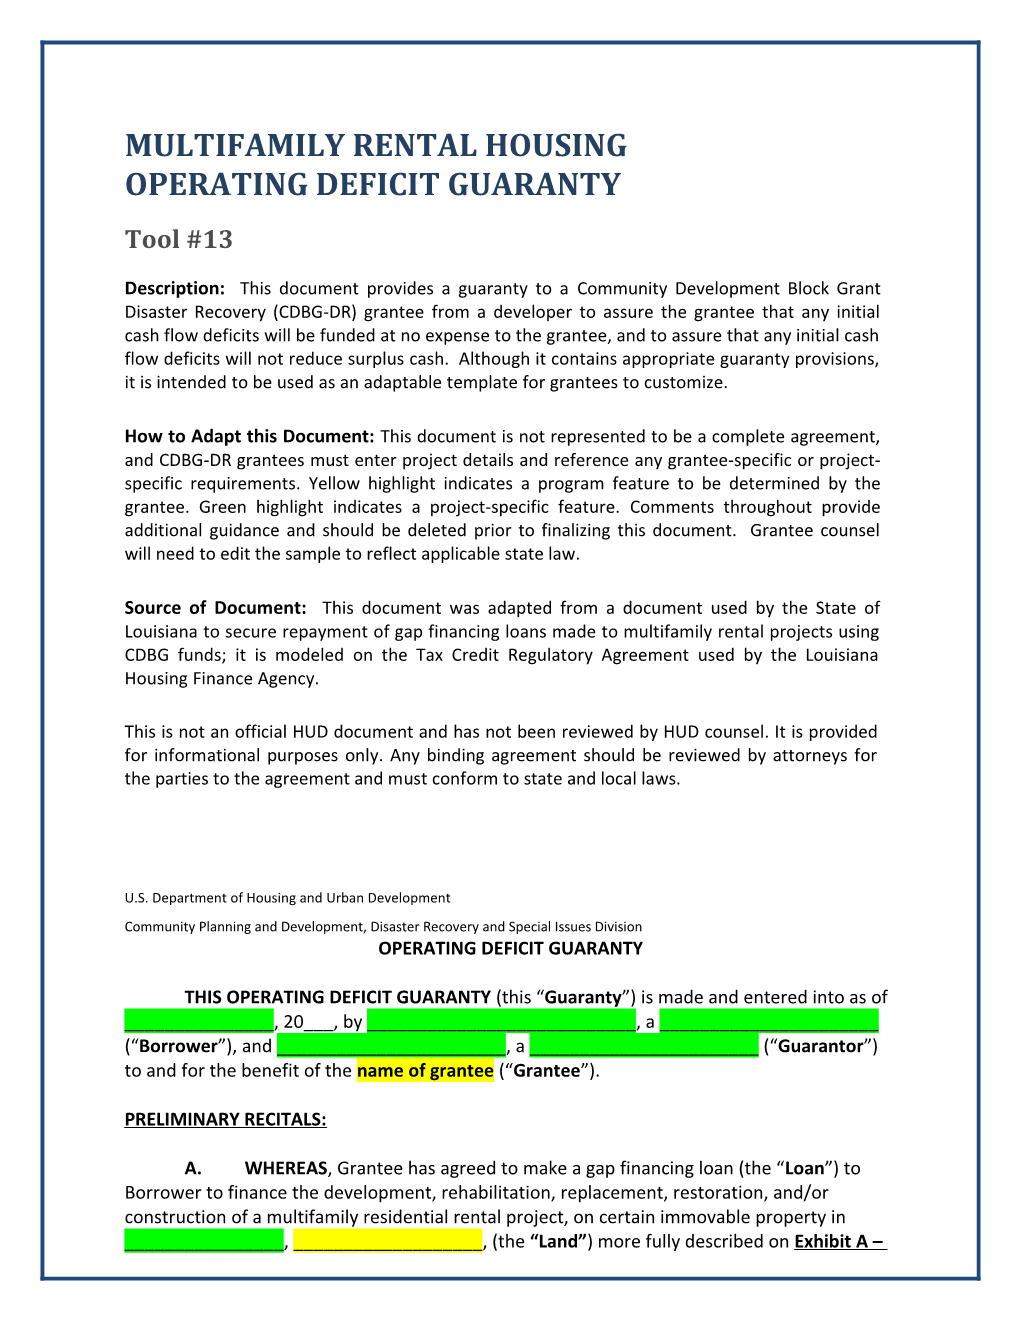 Disaster Recovery Multifamily Rental Operating Deficit Guaranty